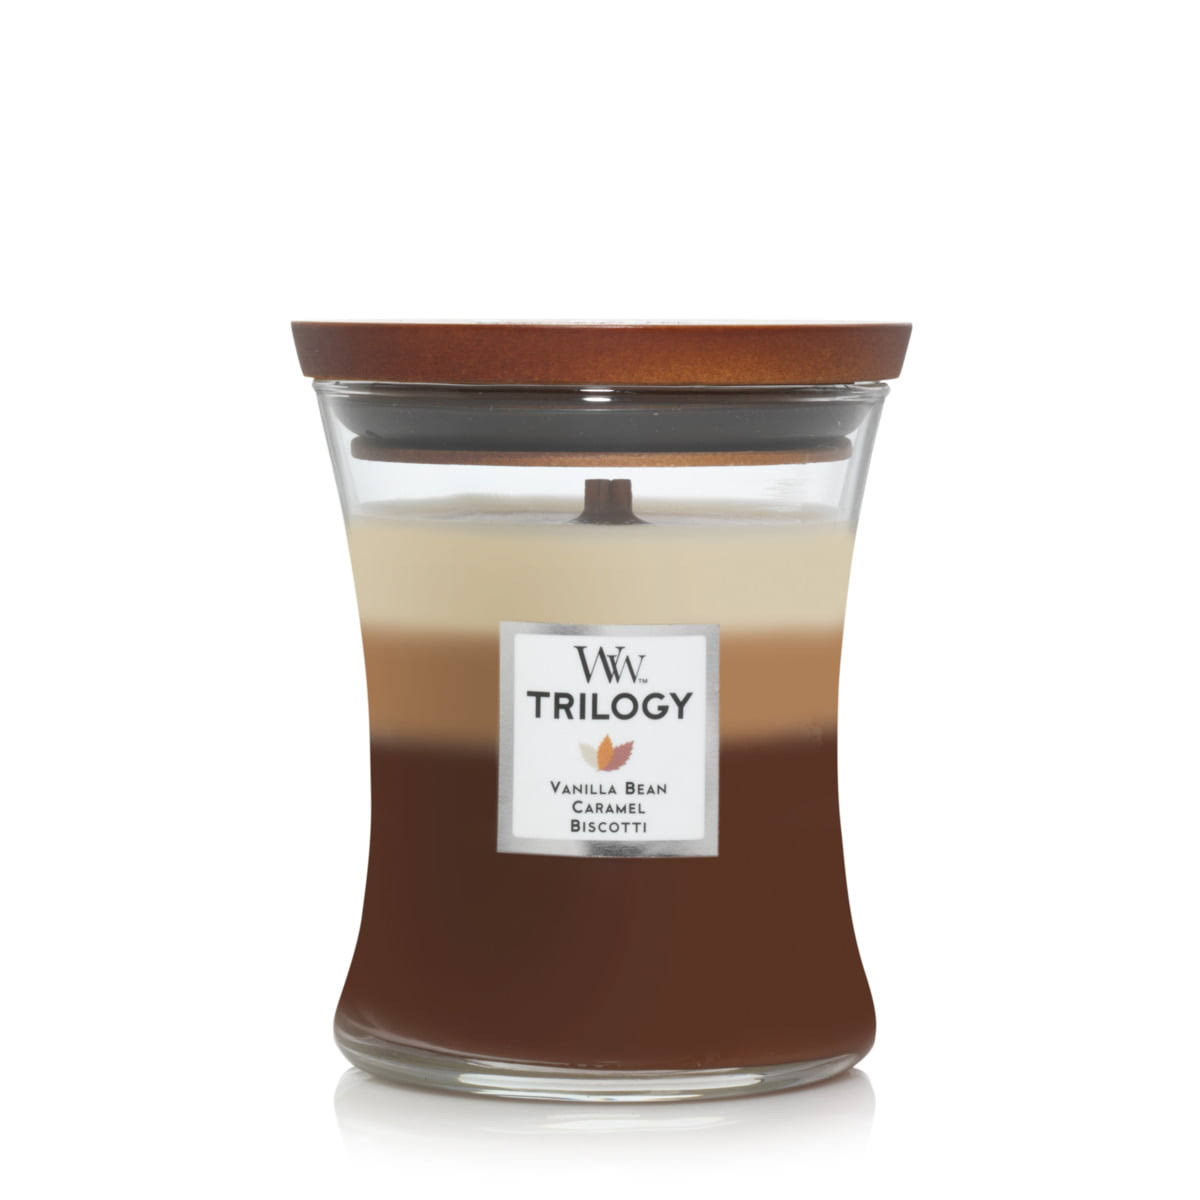 WoodWick Trilogy Soy Wax Candle - Cafe Sweets Delivery, Medium, 12cm